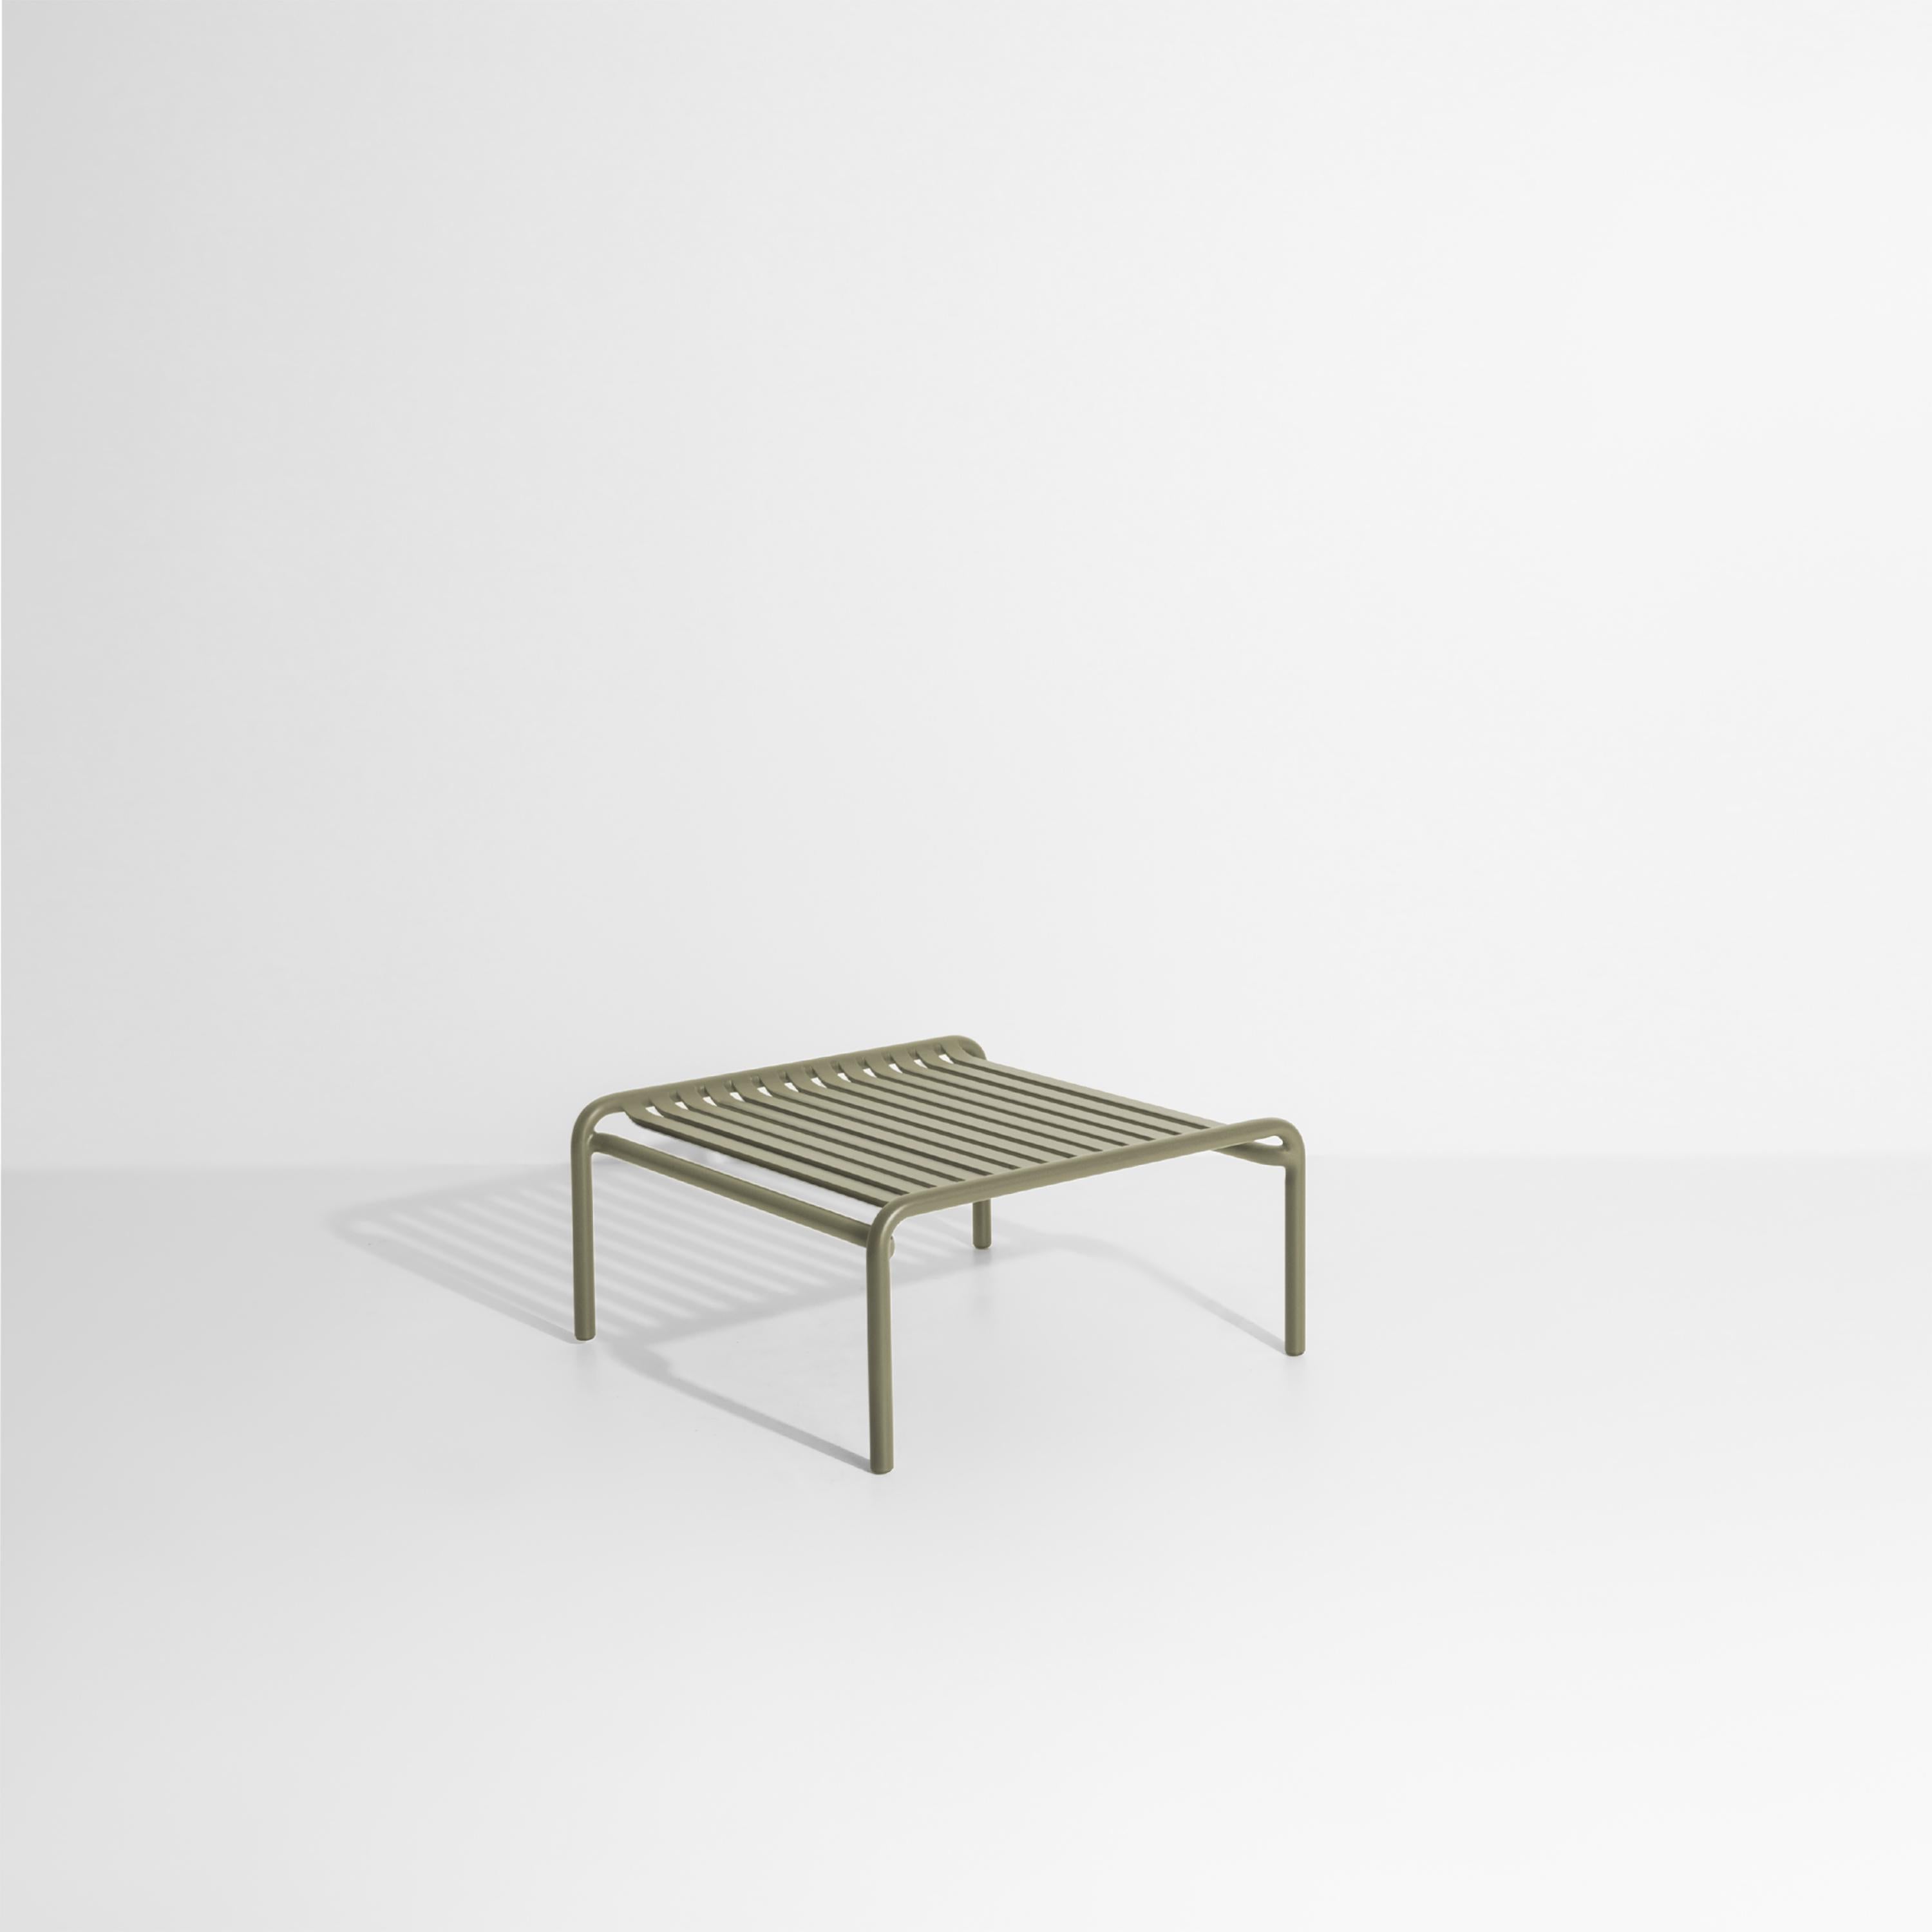 Petite Friture Week-End Coffee Table in Jade Green Aluminium by Studio BrichetZiegler, 2017

The week-end collection is a full range of outdoor furniture, in aluminium grained epoxy paint, matt finish, that includes 18 functions and 8 colours for